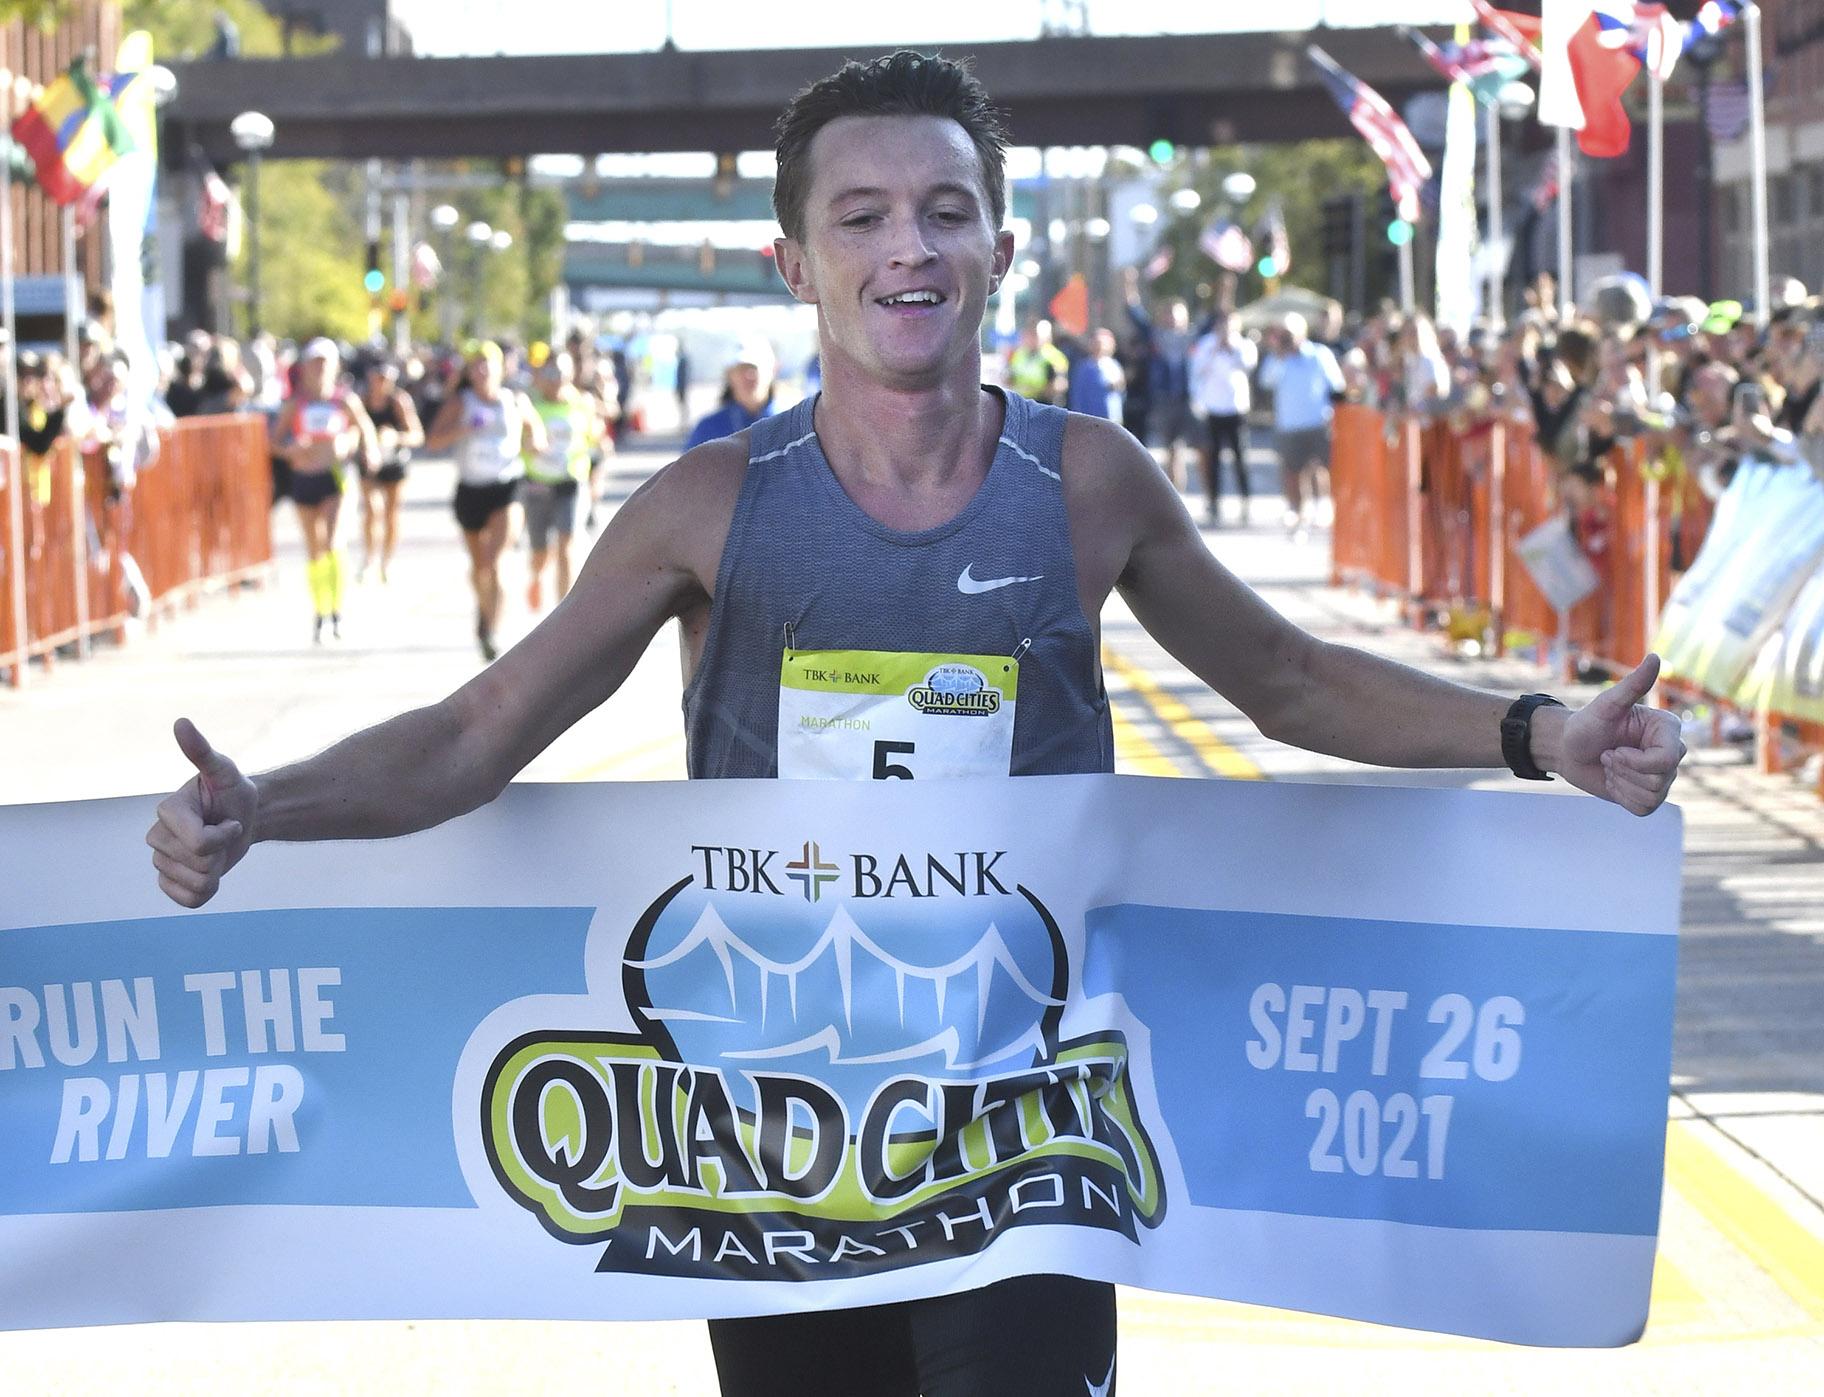 Tyler Pence of Springfield, Ill., finishes first in the TBK Bank Quad Cities Marathon on Sunday, Sept. 26, 2021, in Moline, Ill. (Gary L. Krambeck / Quad City Times via AP)